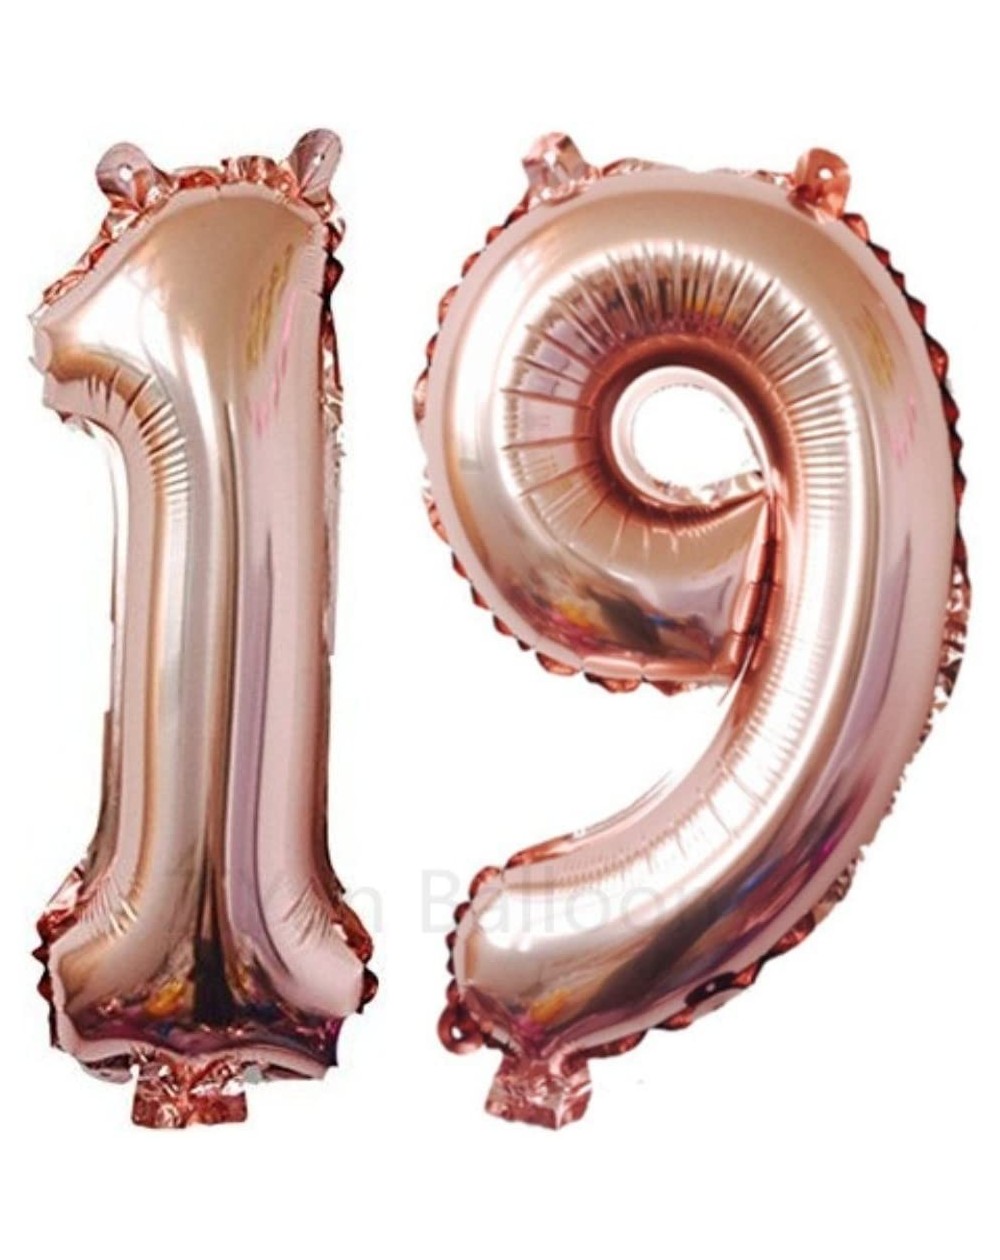 Balloons 40 Inch Giant 19th Rose Gold Number Balloons-Birthday / Party Balloons - Rose Gold Number 19 - C418CK4825N $11.61